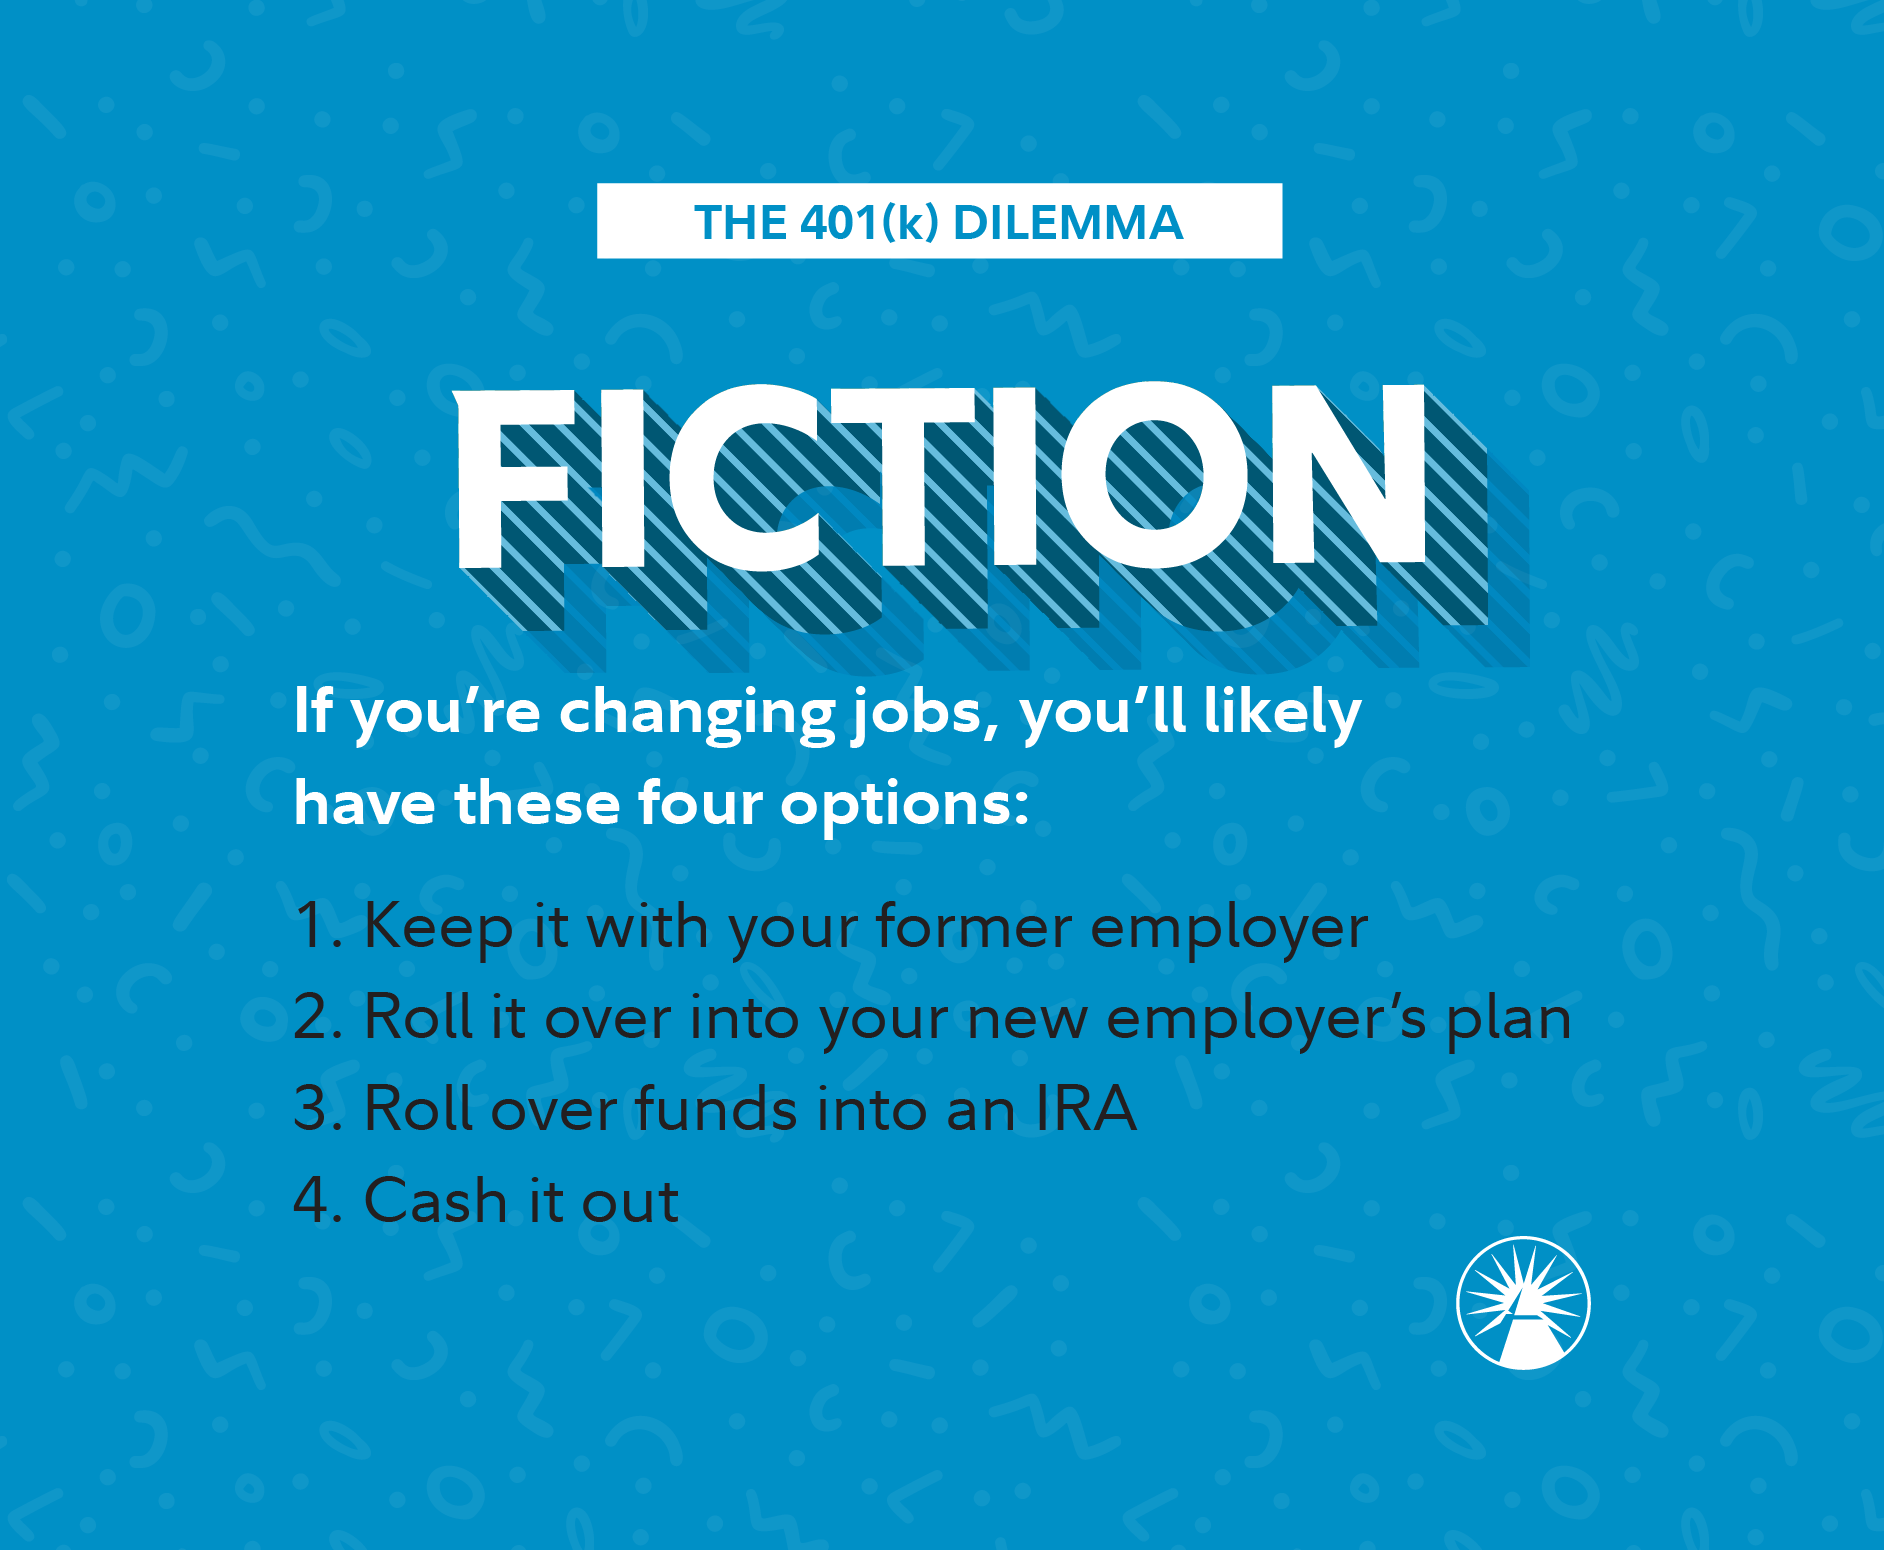 Fiction If you're changing jobs, you'll likely have these four options: 1. Keep it with your former employer 2. Roll it over into your new employer's plan 3. Roll over funds into an IRA 4. Cash it out